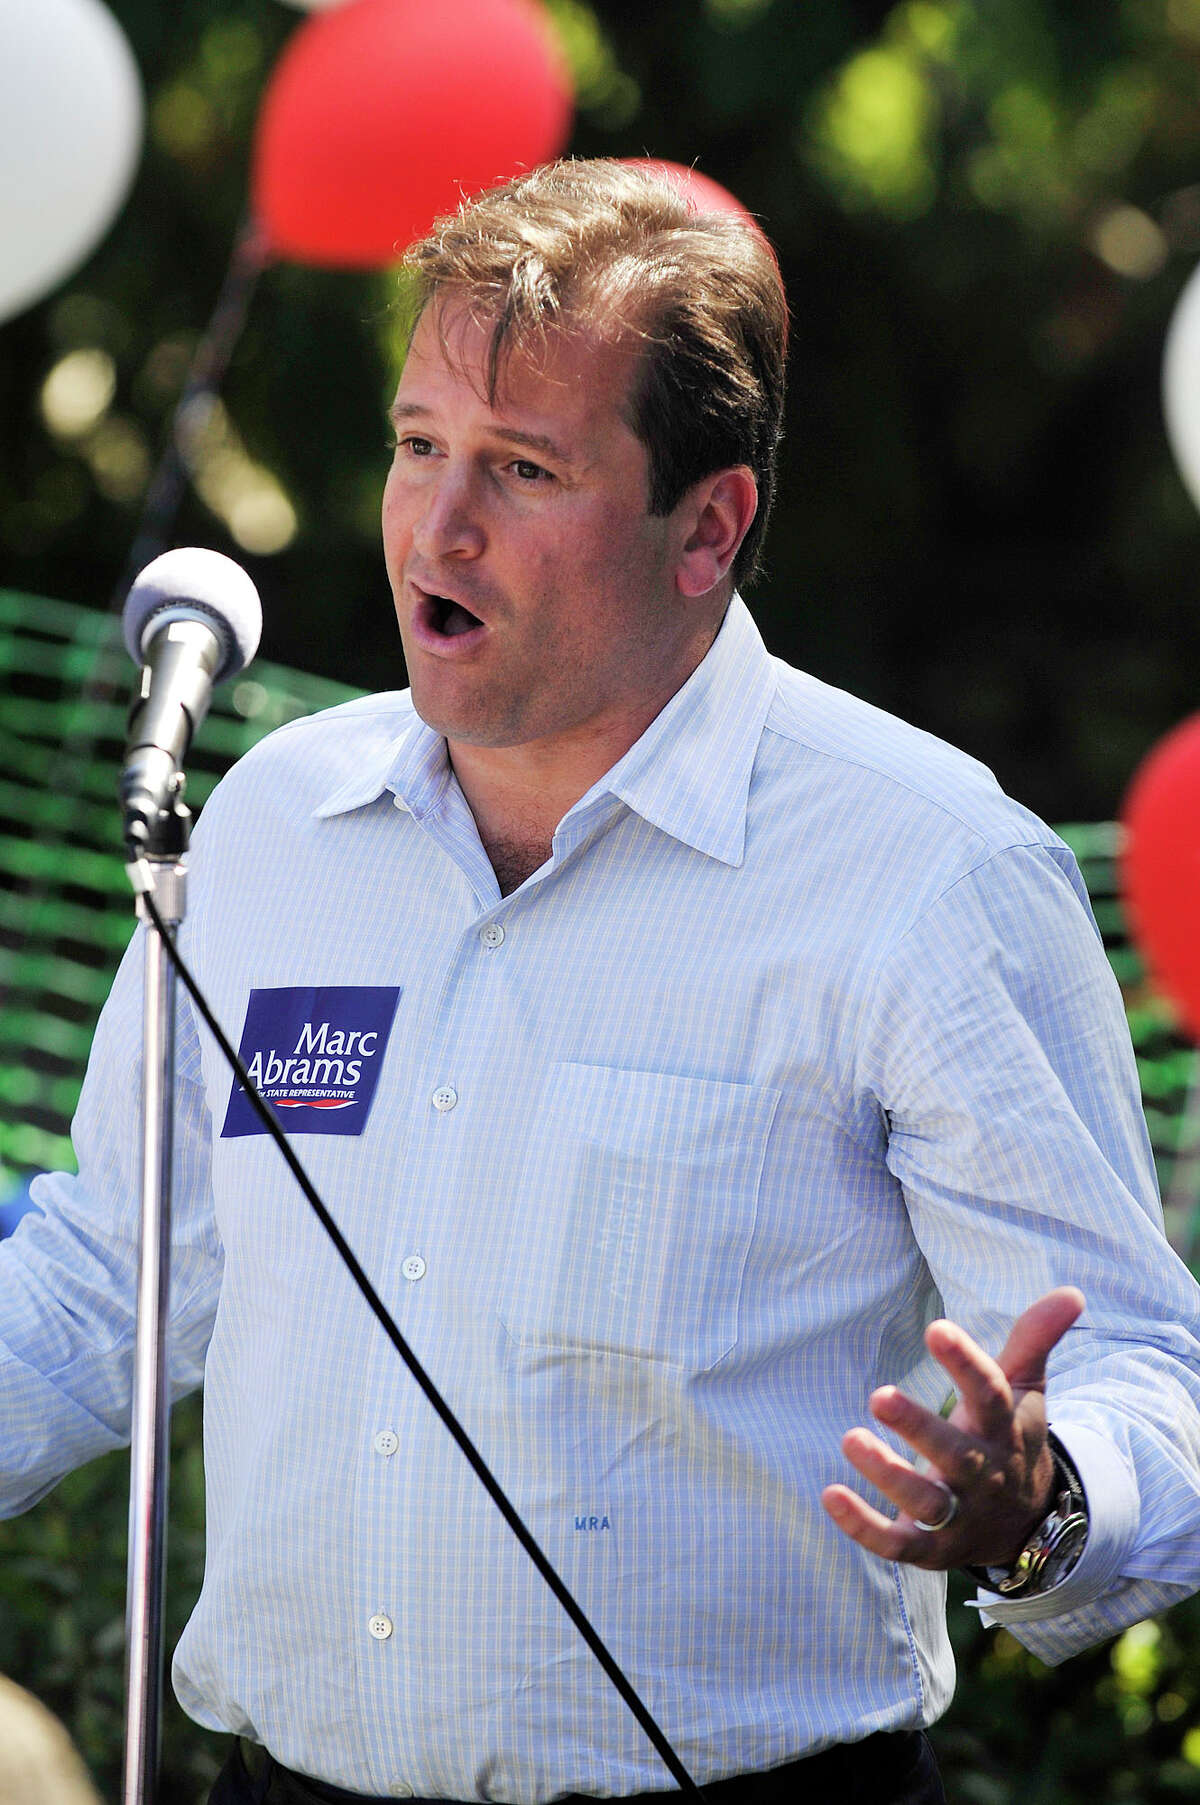 Democratic State Assembly candidate for the 149th District Marc Abrams speaks during the Greenwich Democratic Committee's annual campaign kick-off picnic at the Garden Education Center of Greenwich in Cos Cob, Greenwich, Conn., on Sunday, Sept. 14, 2014.